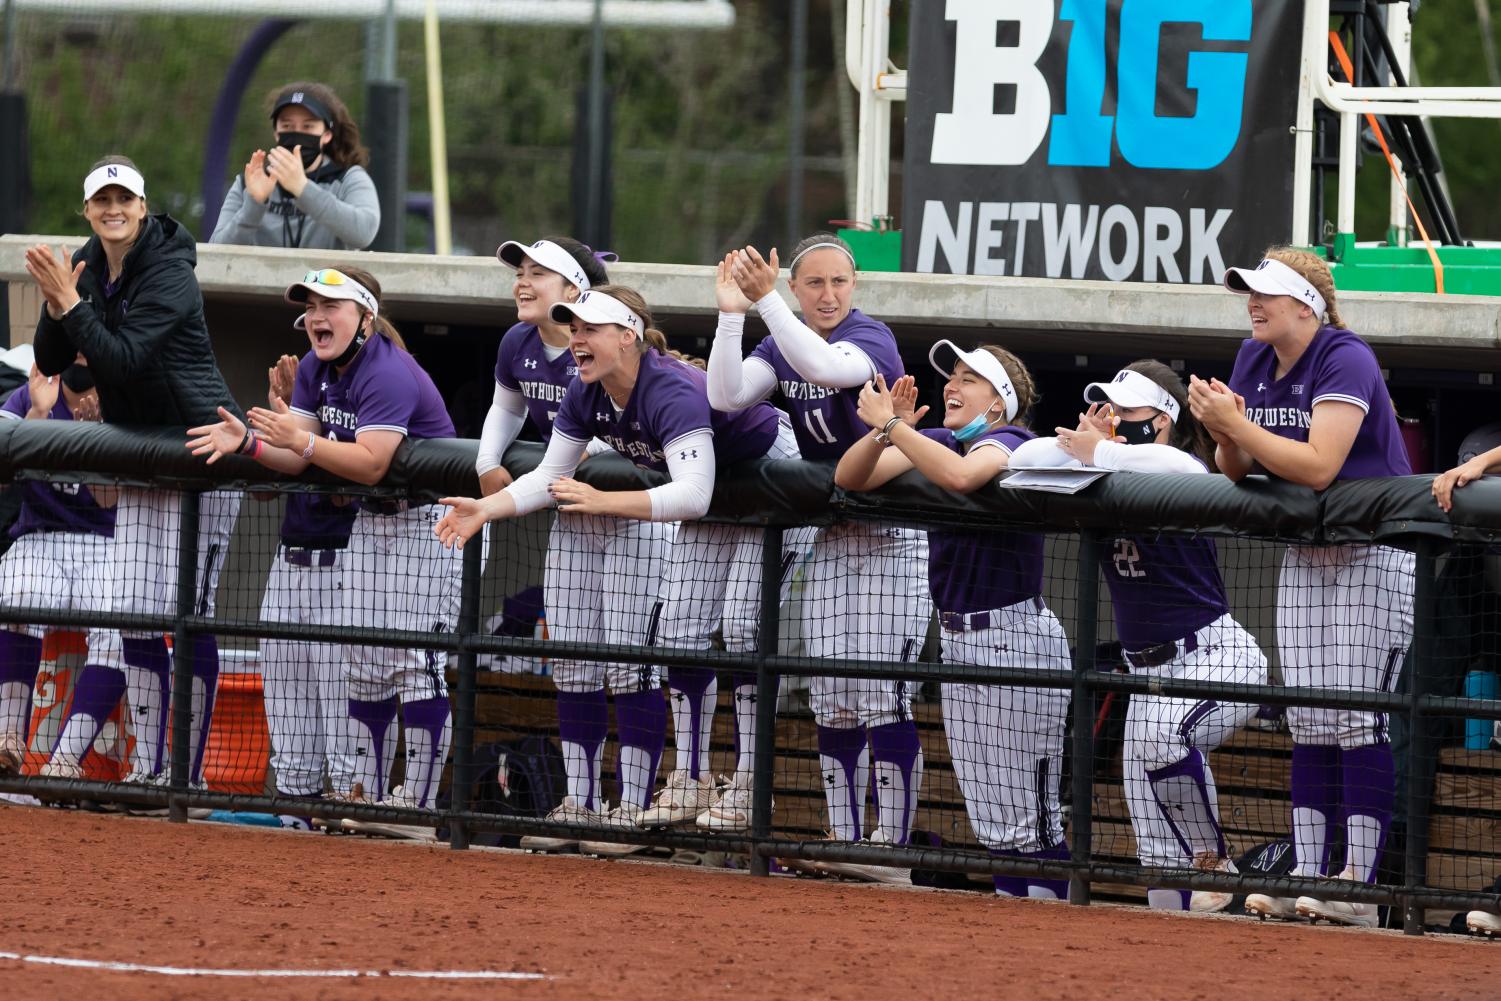 Seven+girls+in+purple+jerseys+and+white+pants+cheer+and+smile+from+a+softball+dugout.